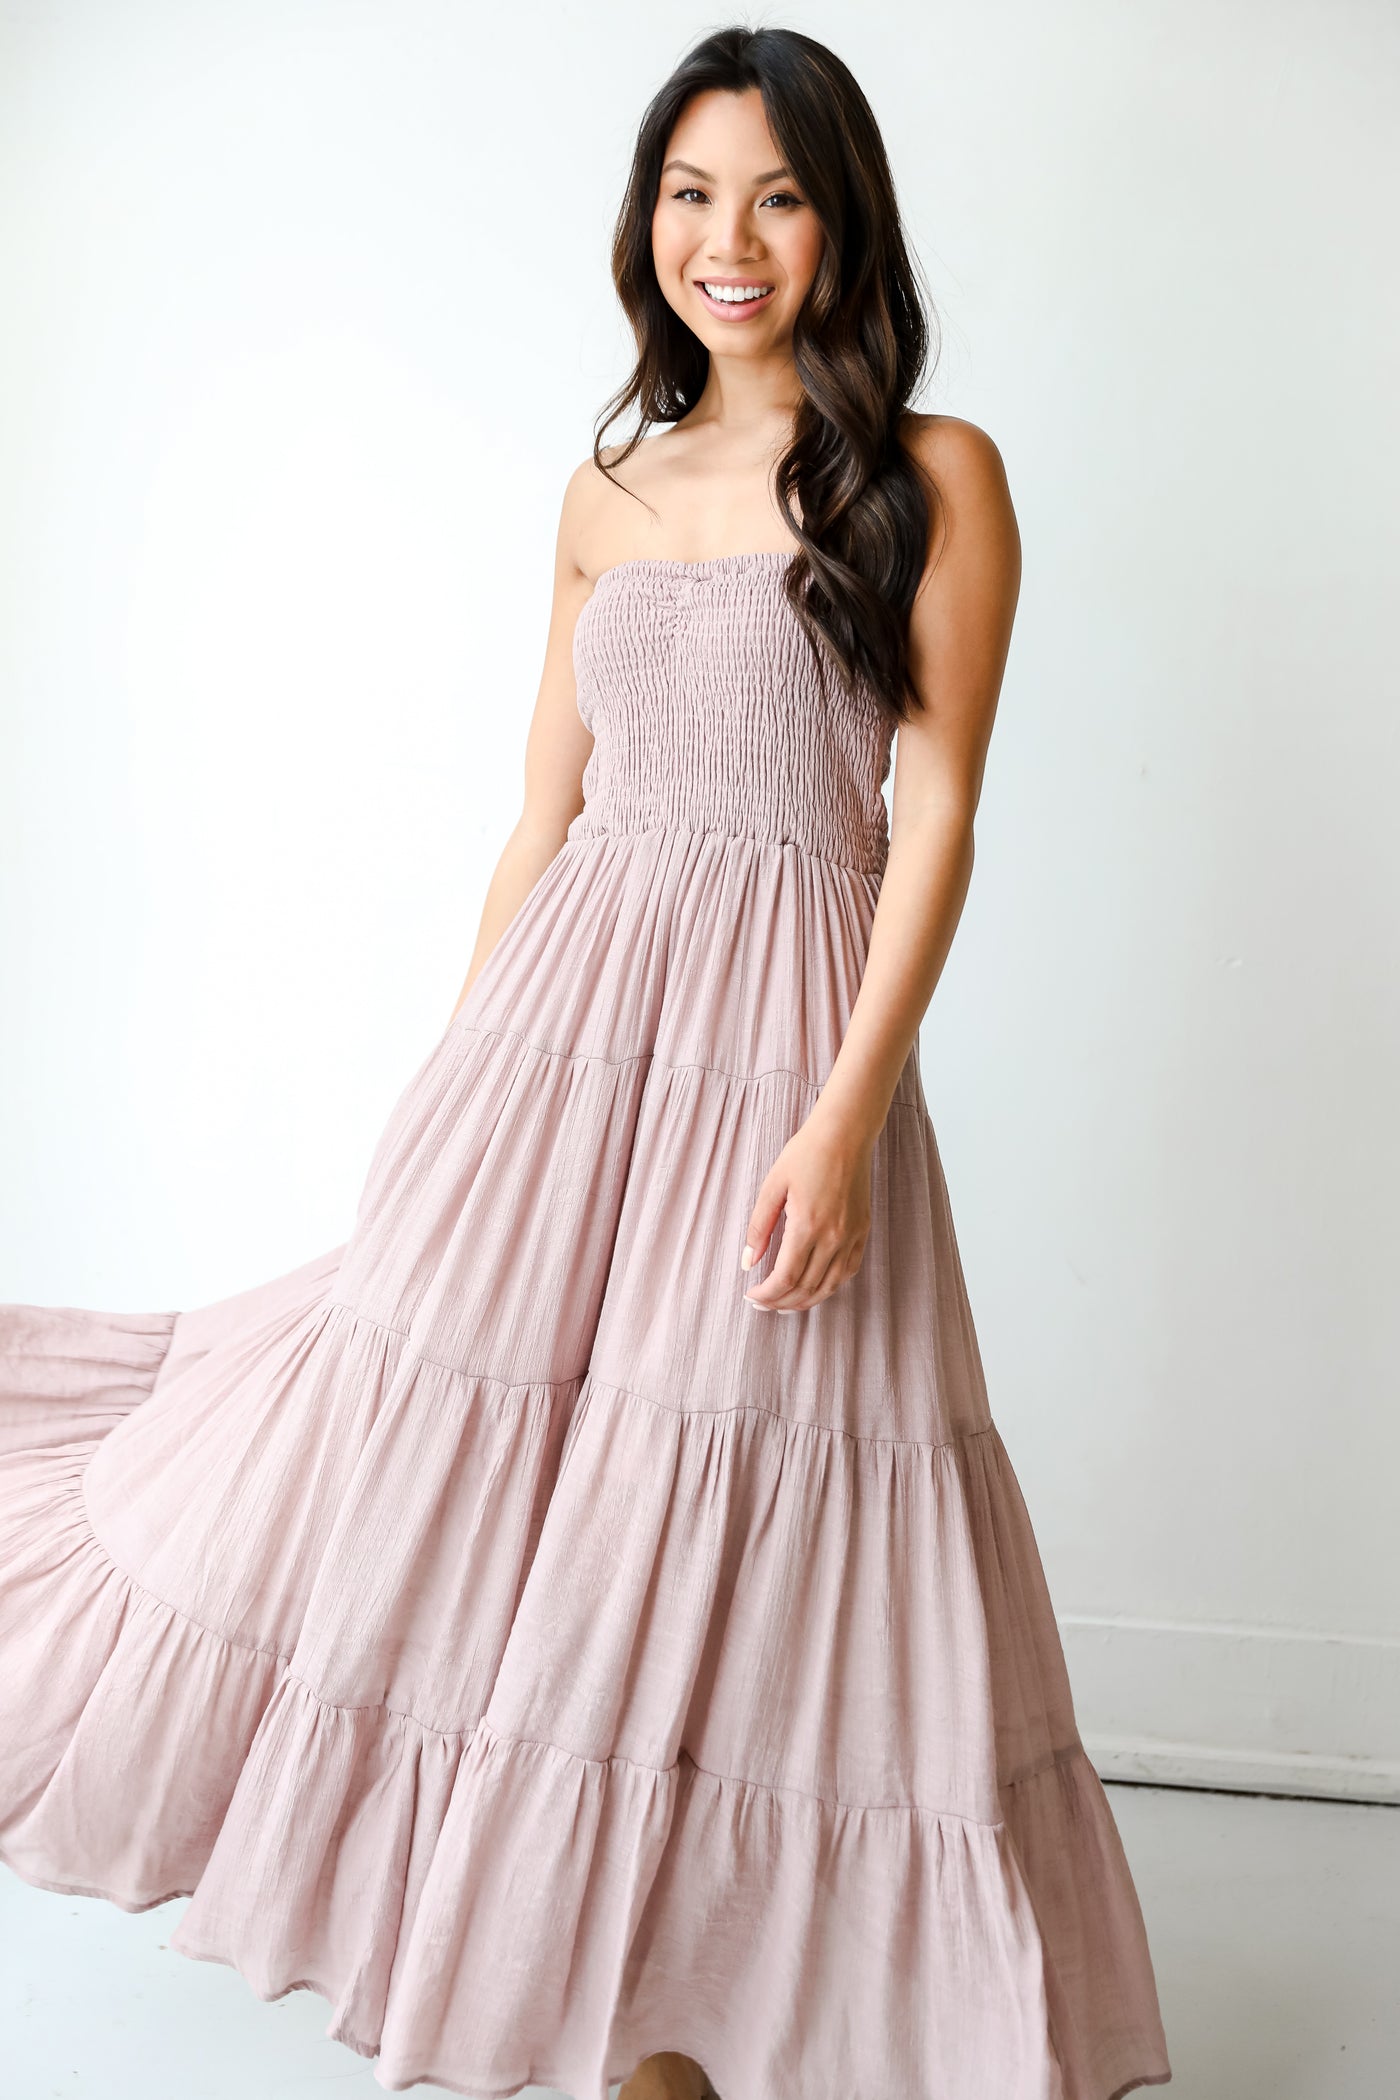 Strapless Maxi Dress in mauve on model